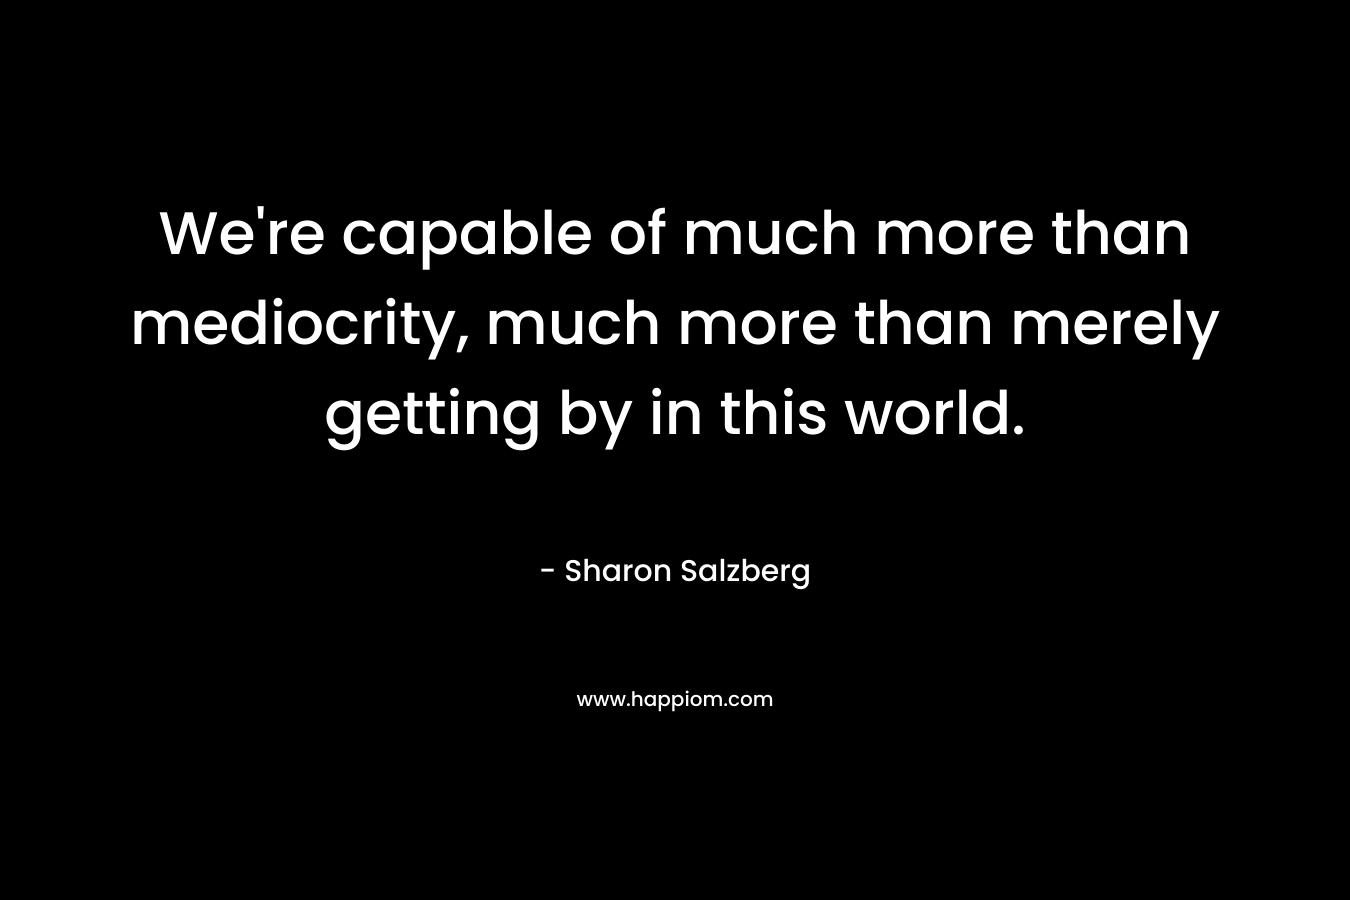 We're capable of much more than mediocrity, much more than merely getting by in this world.